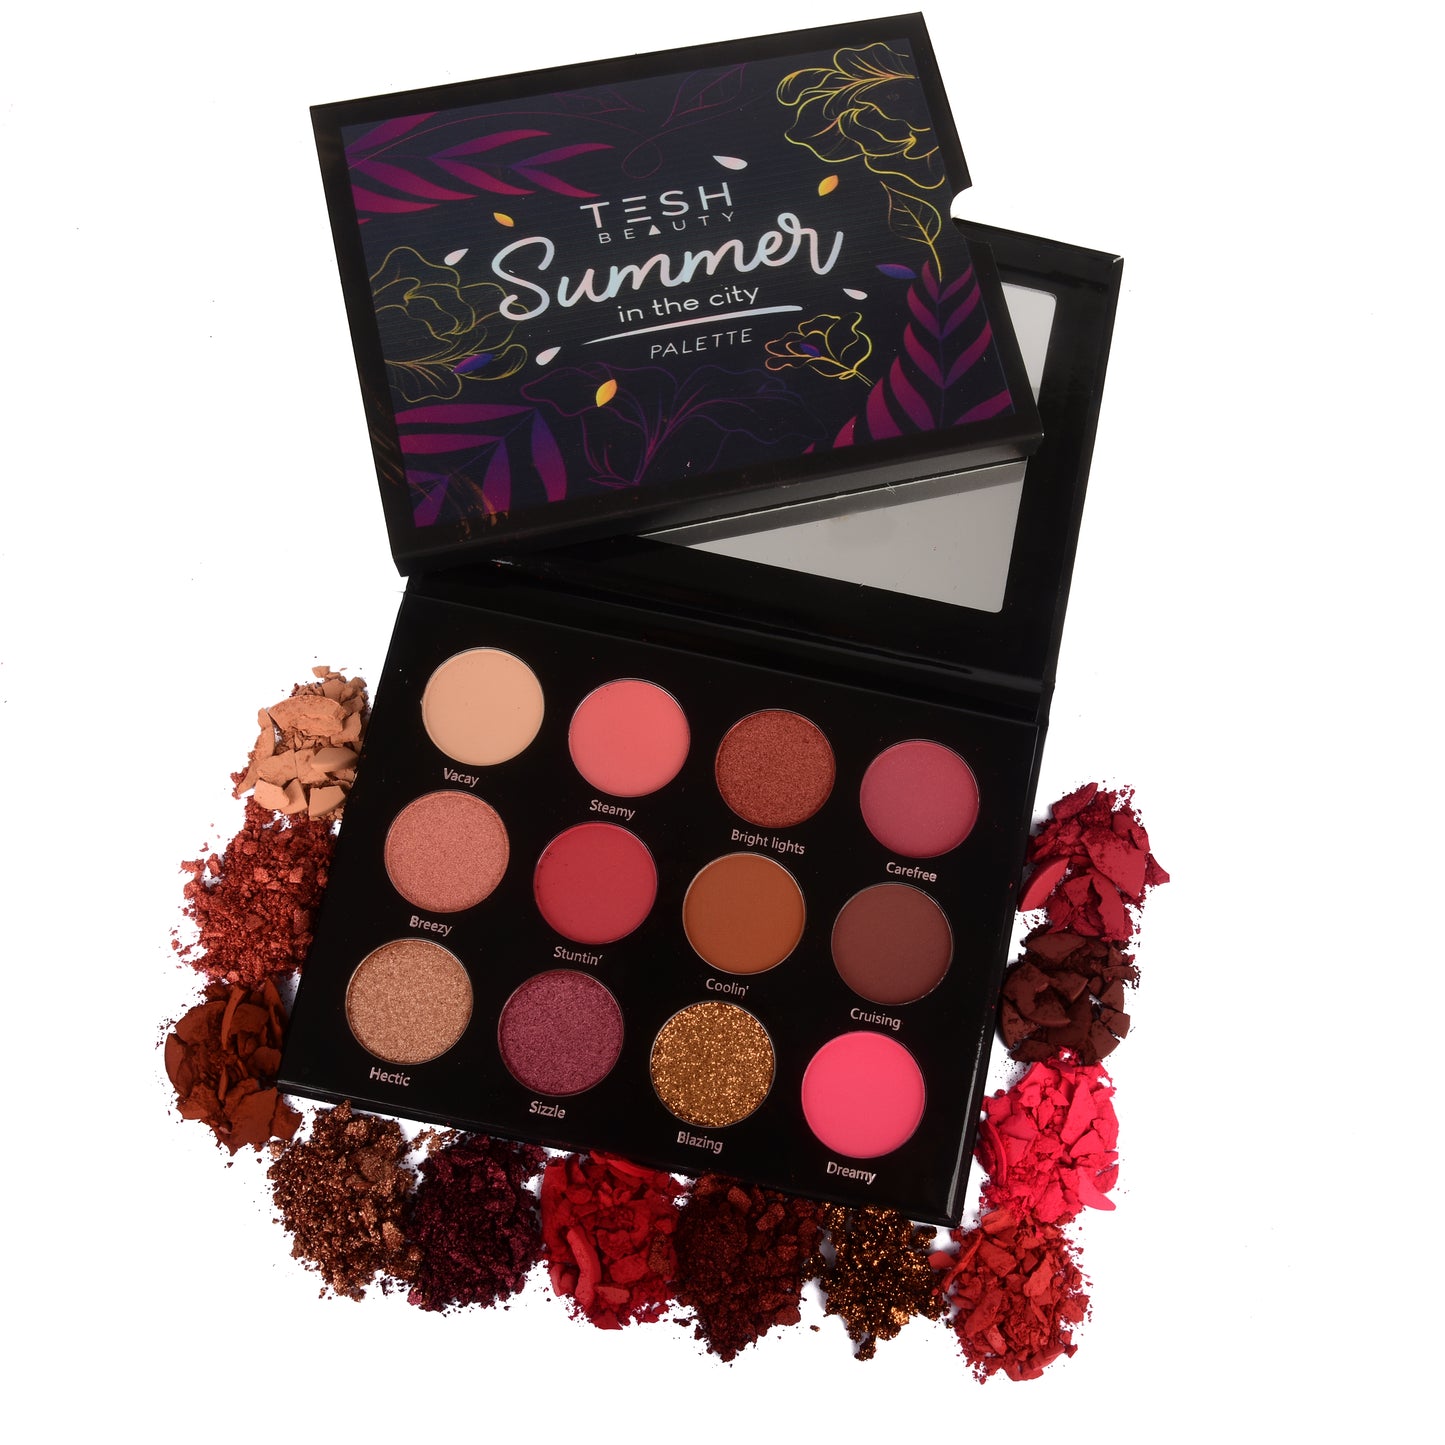 Summer in the city palette